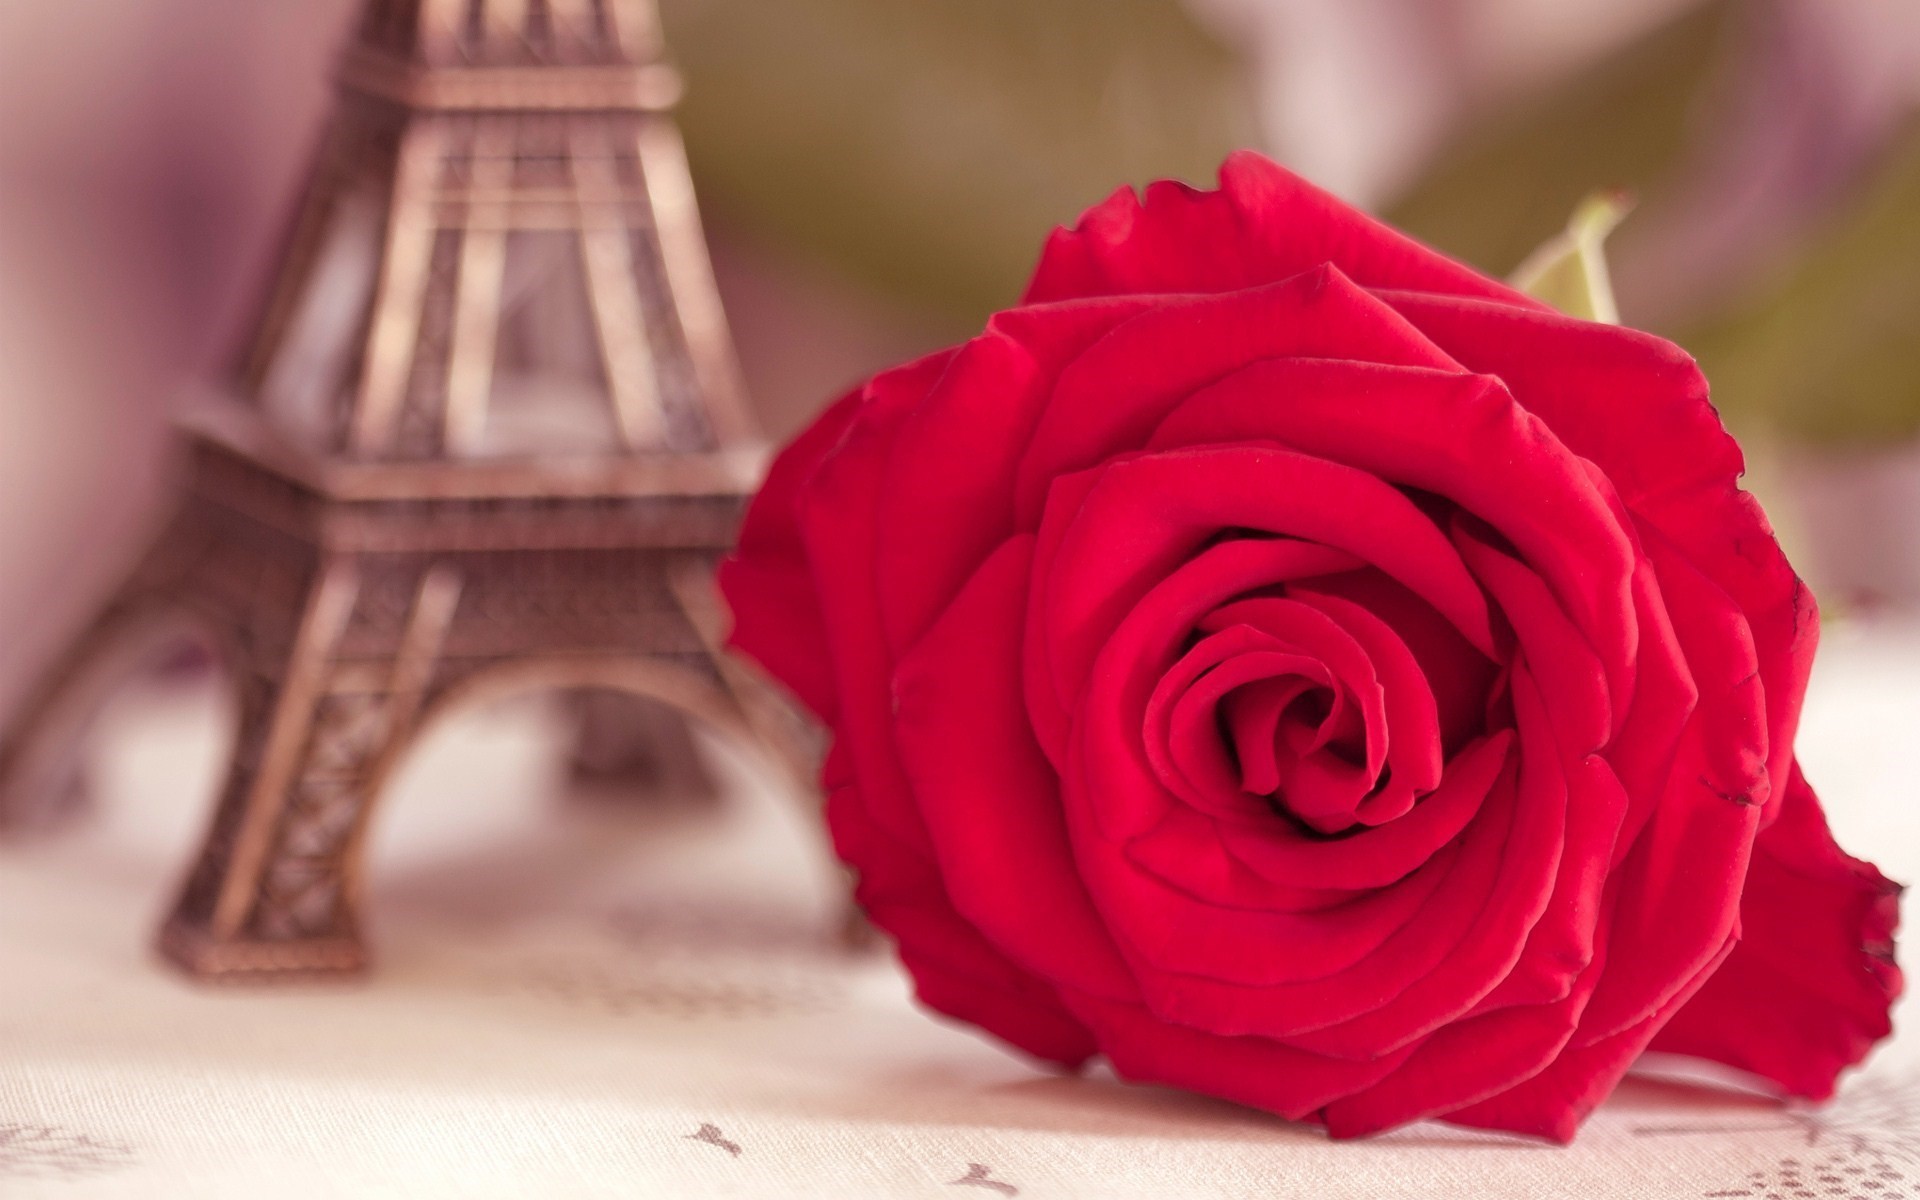 Cute Roses Wallpapers - Eiffel Tower With Red Rose - HD Wallpaper 